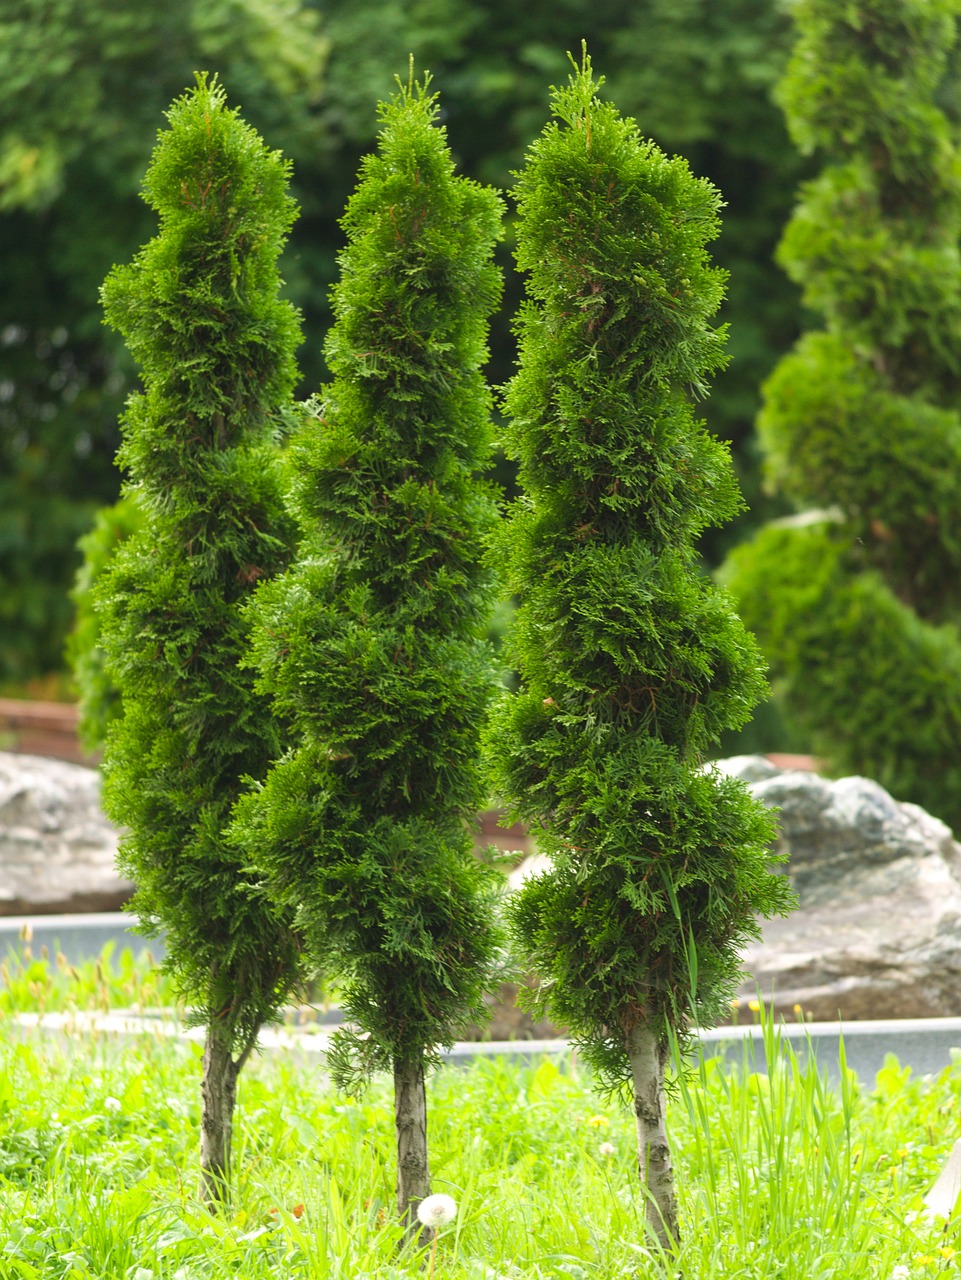 Three slender Arborvitae trees standing upright with dense, dark green foliage in a lush grassy landscape.